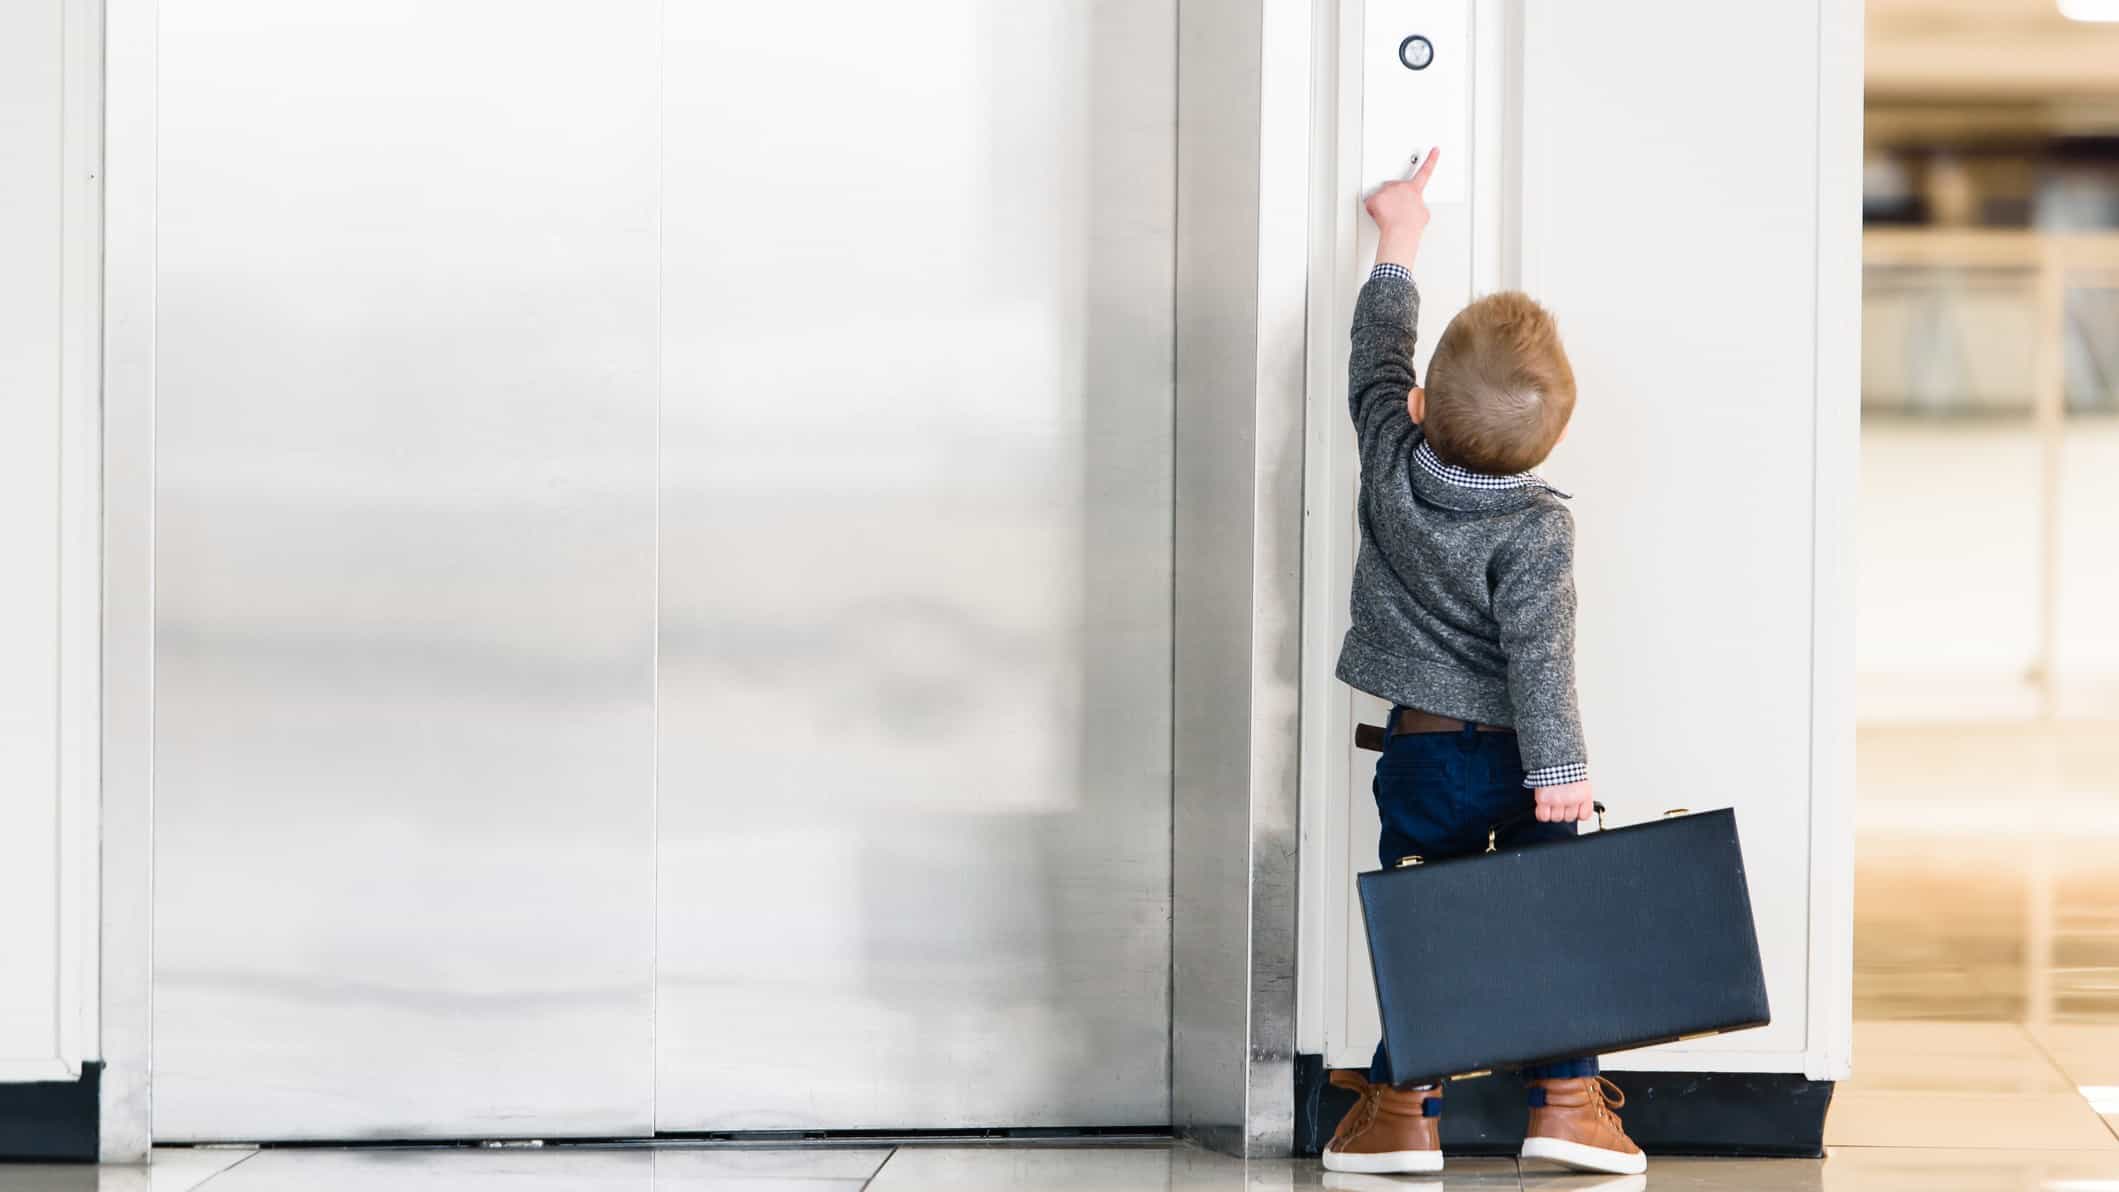 a small child carrying a brief case tries to reach an elevator button outside closed elevator doors.